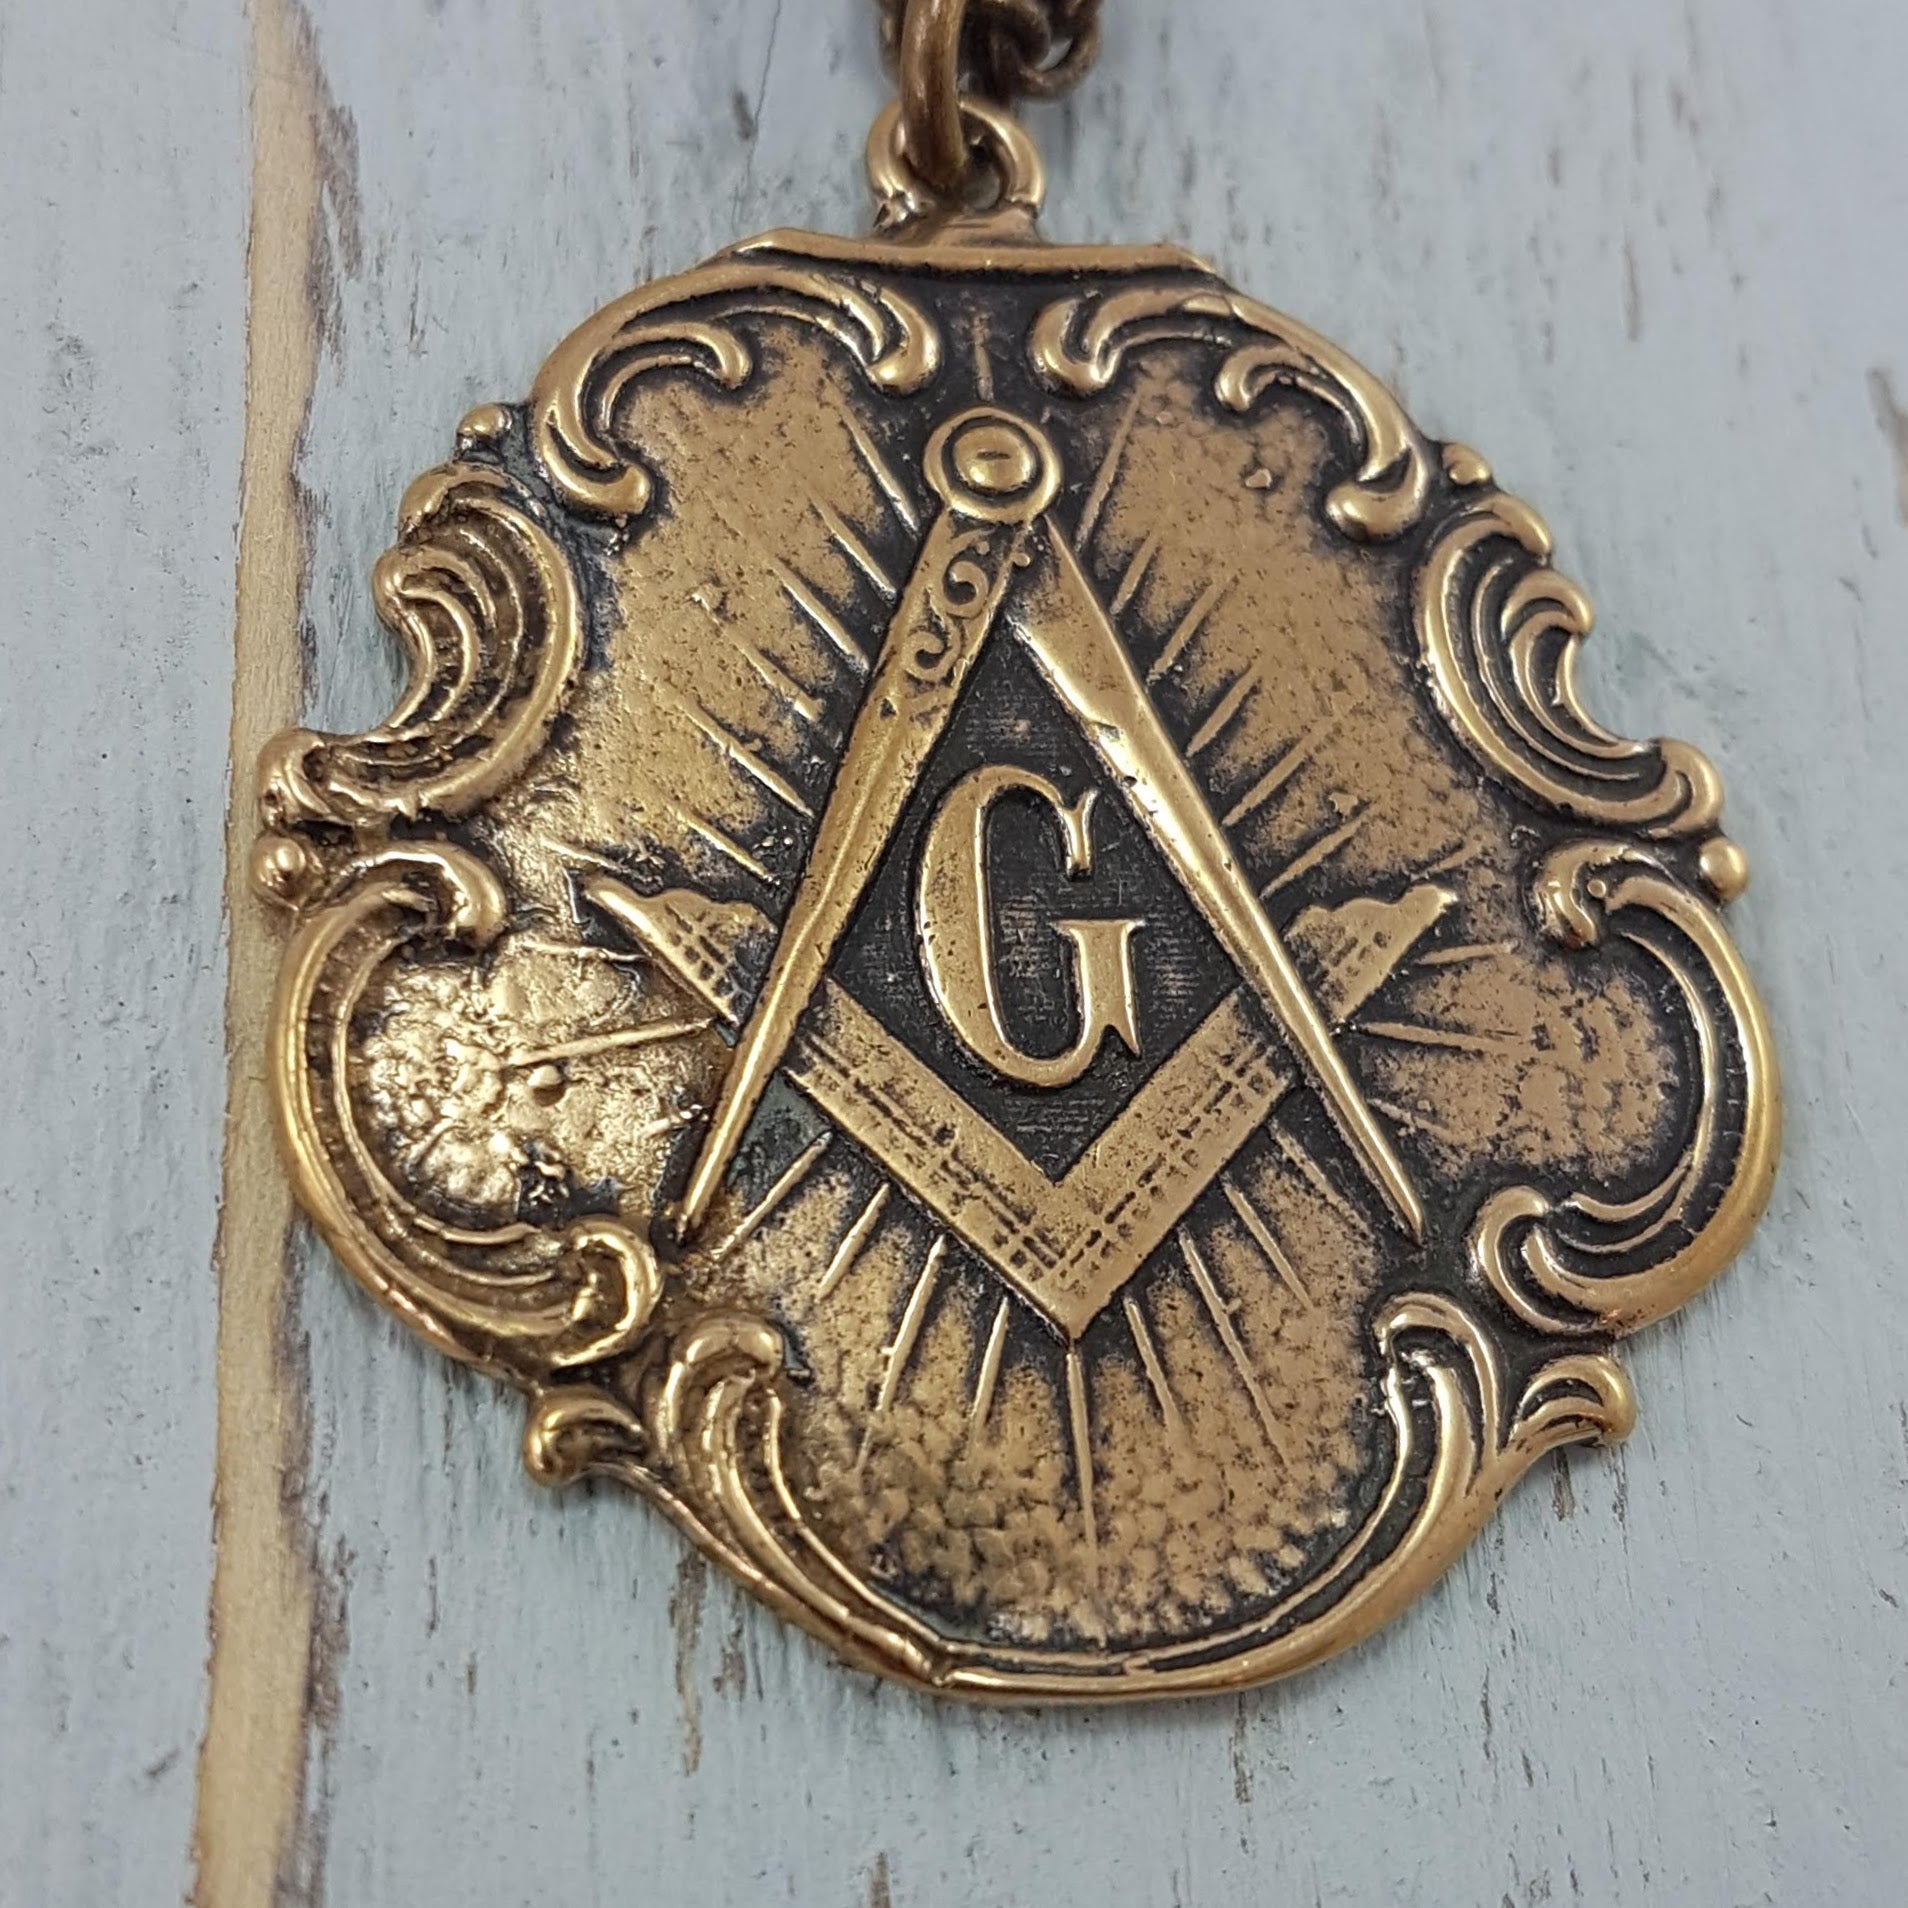 Free Mason Square and Compasses Necklace - Gwen Delicious Jewelry Designs